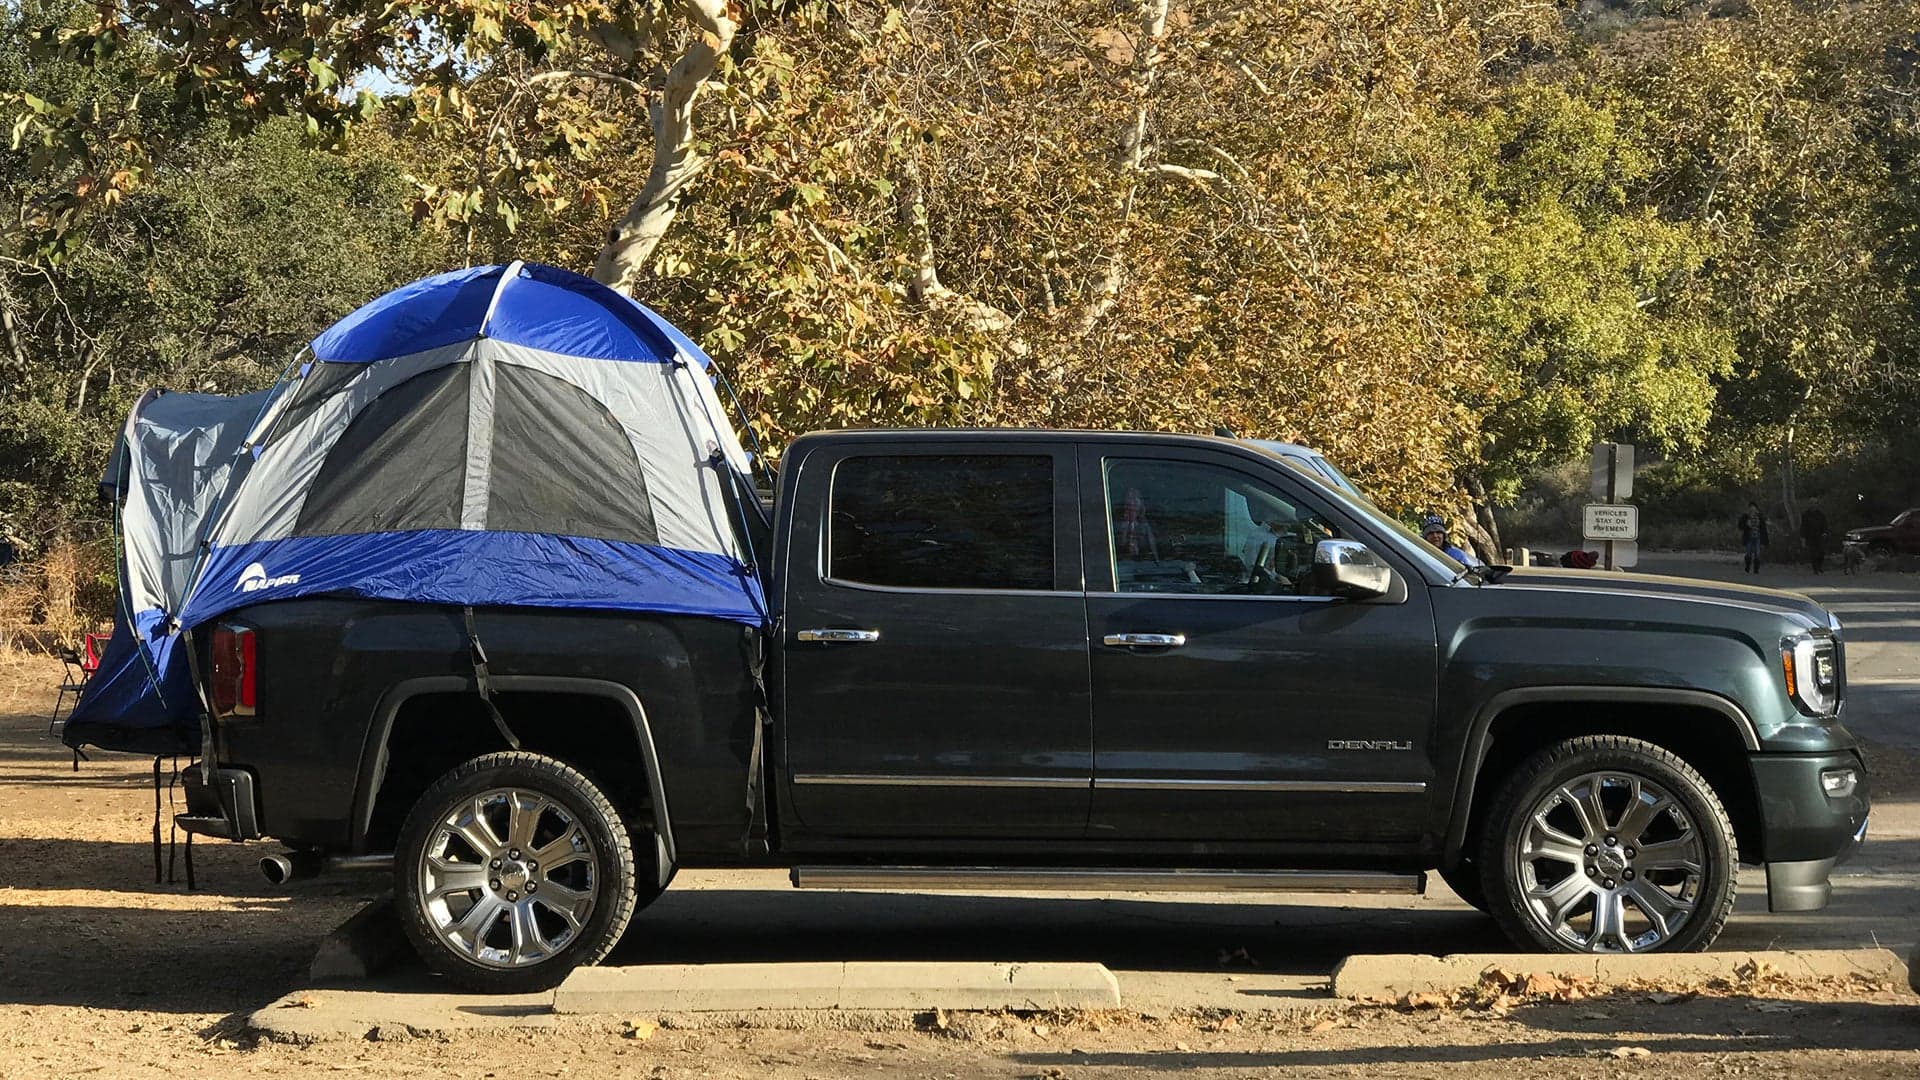 The 2018 GMC Sierra 1500 Denali Camping Truck Review: The Cure for the Common Campsite